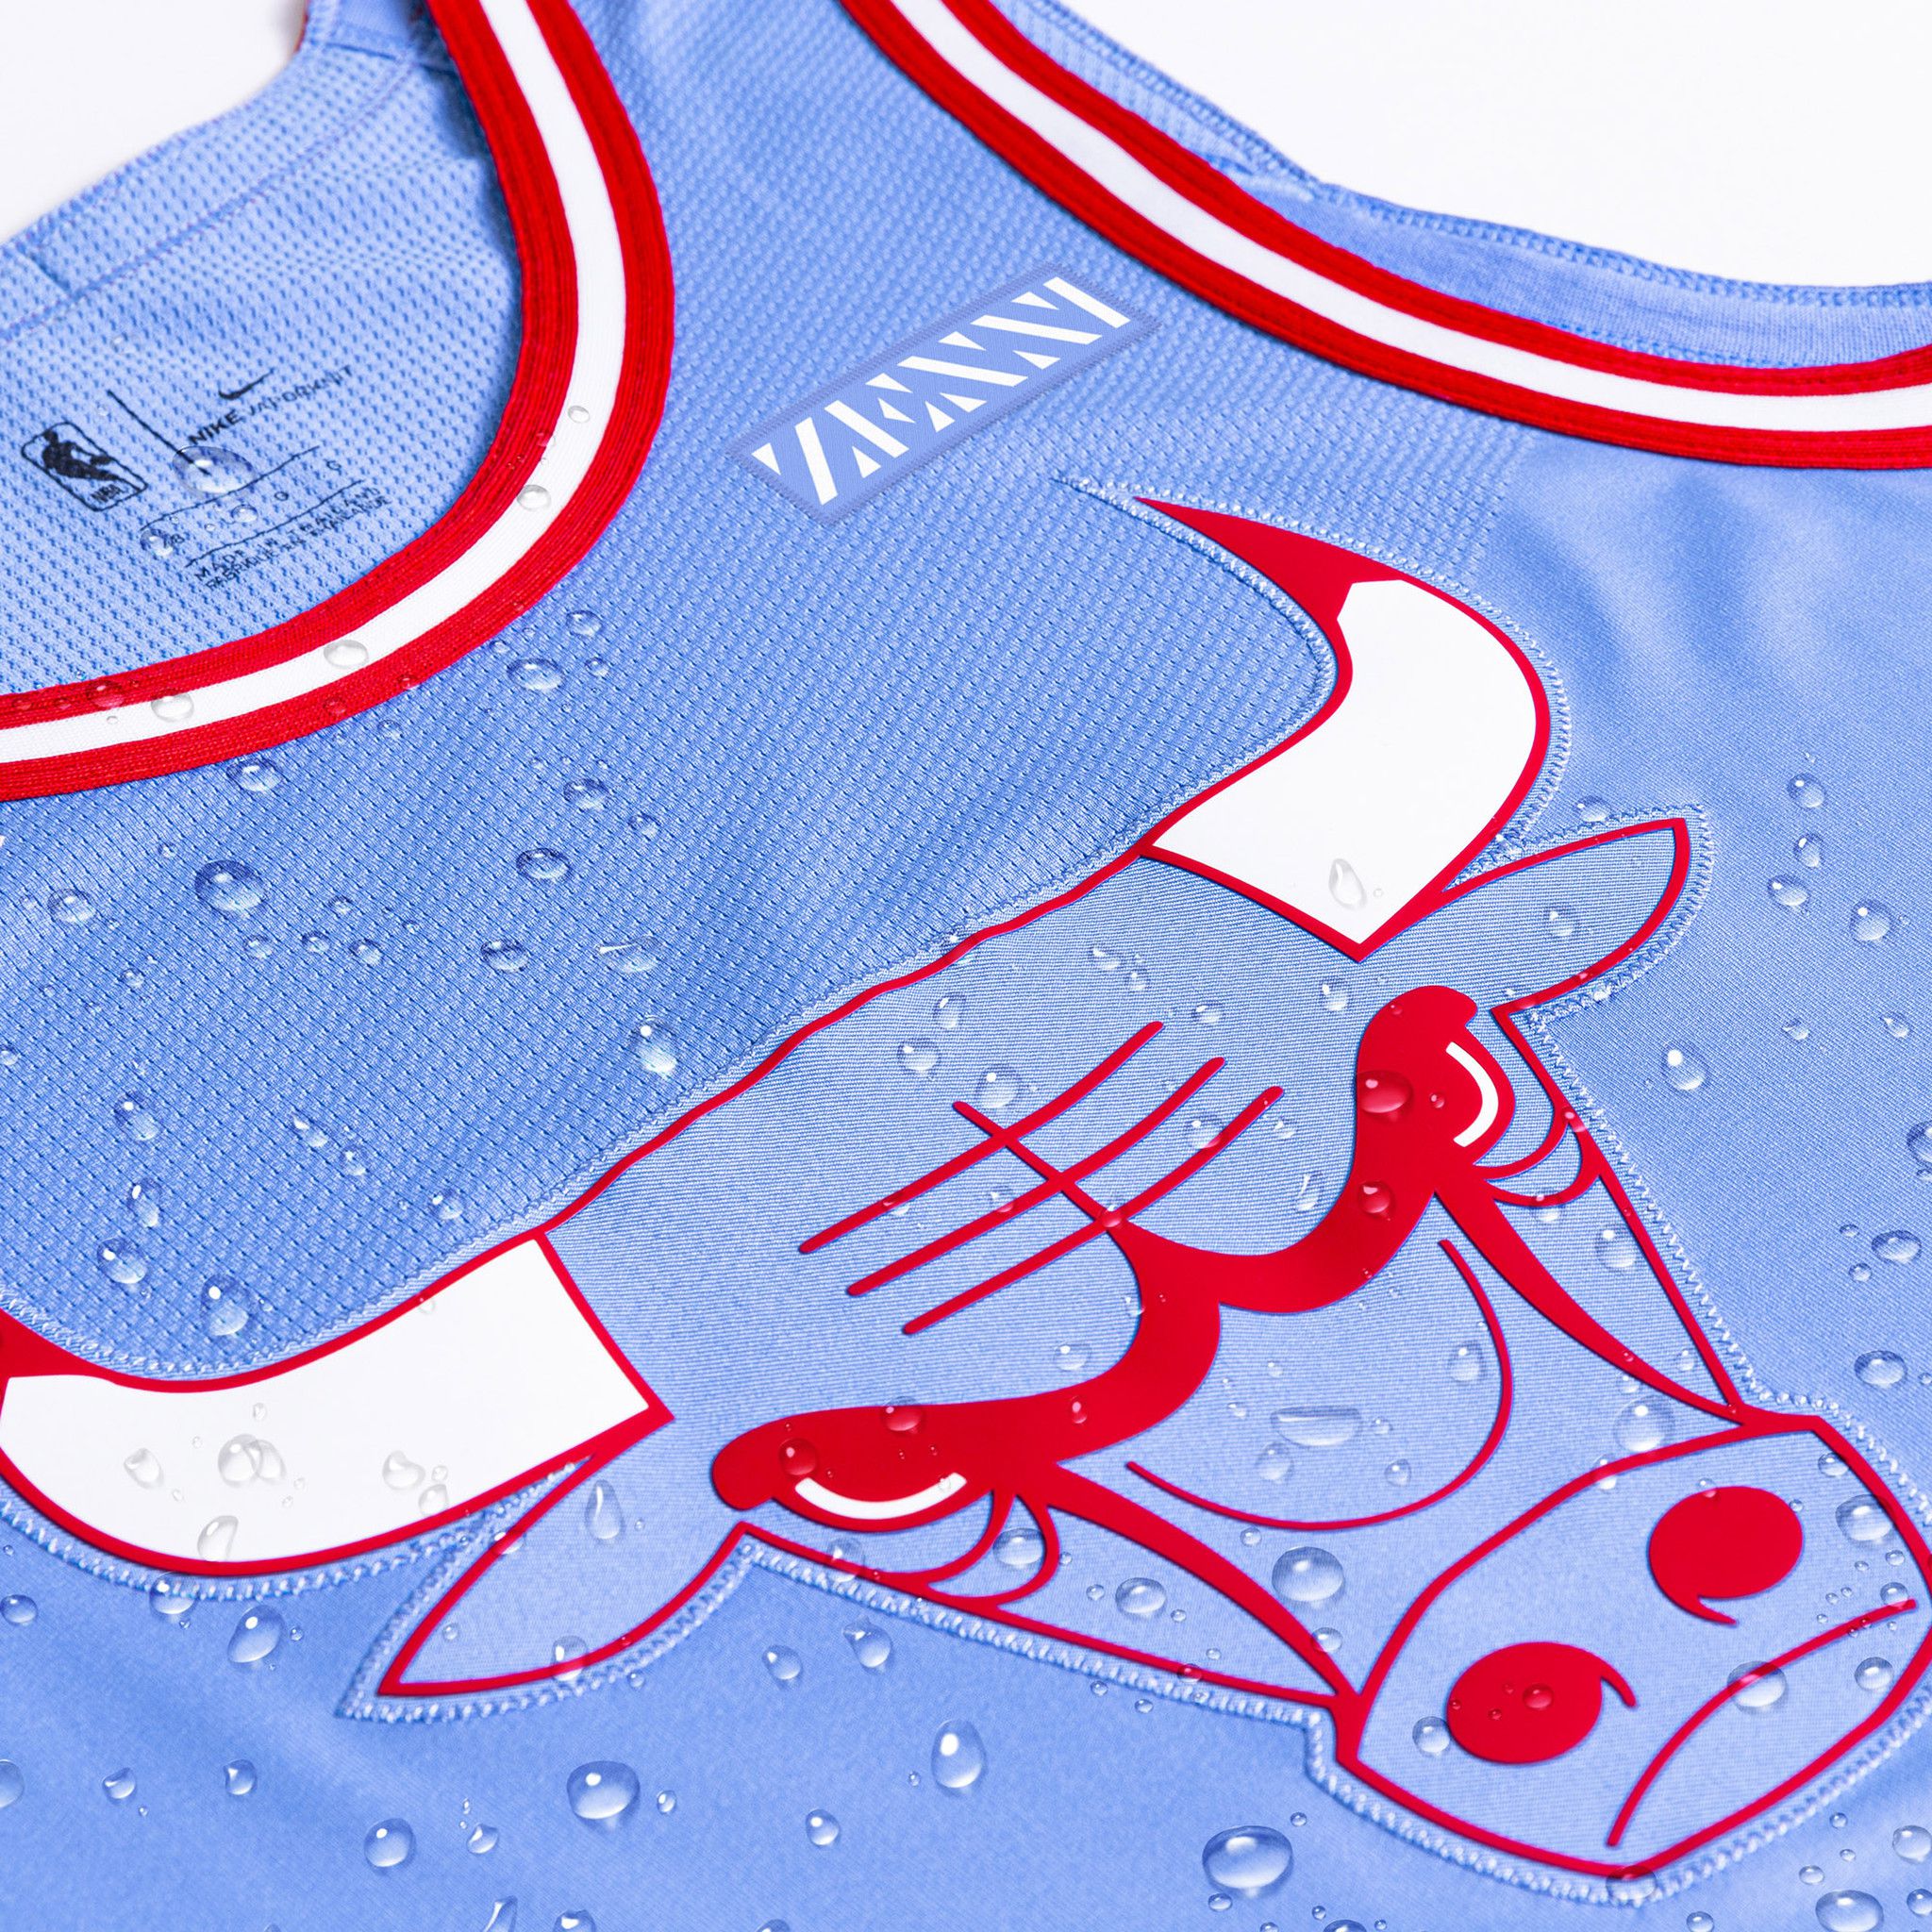 Chicago Bulls unveil City Edition jerseys inspired by the